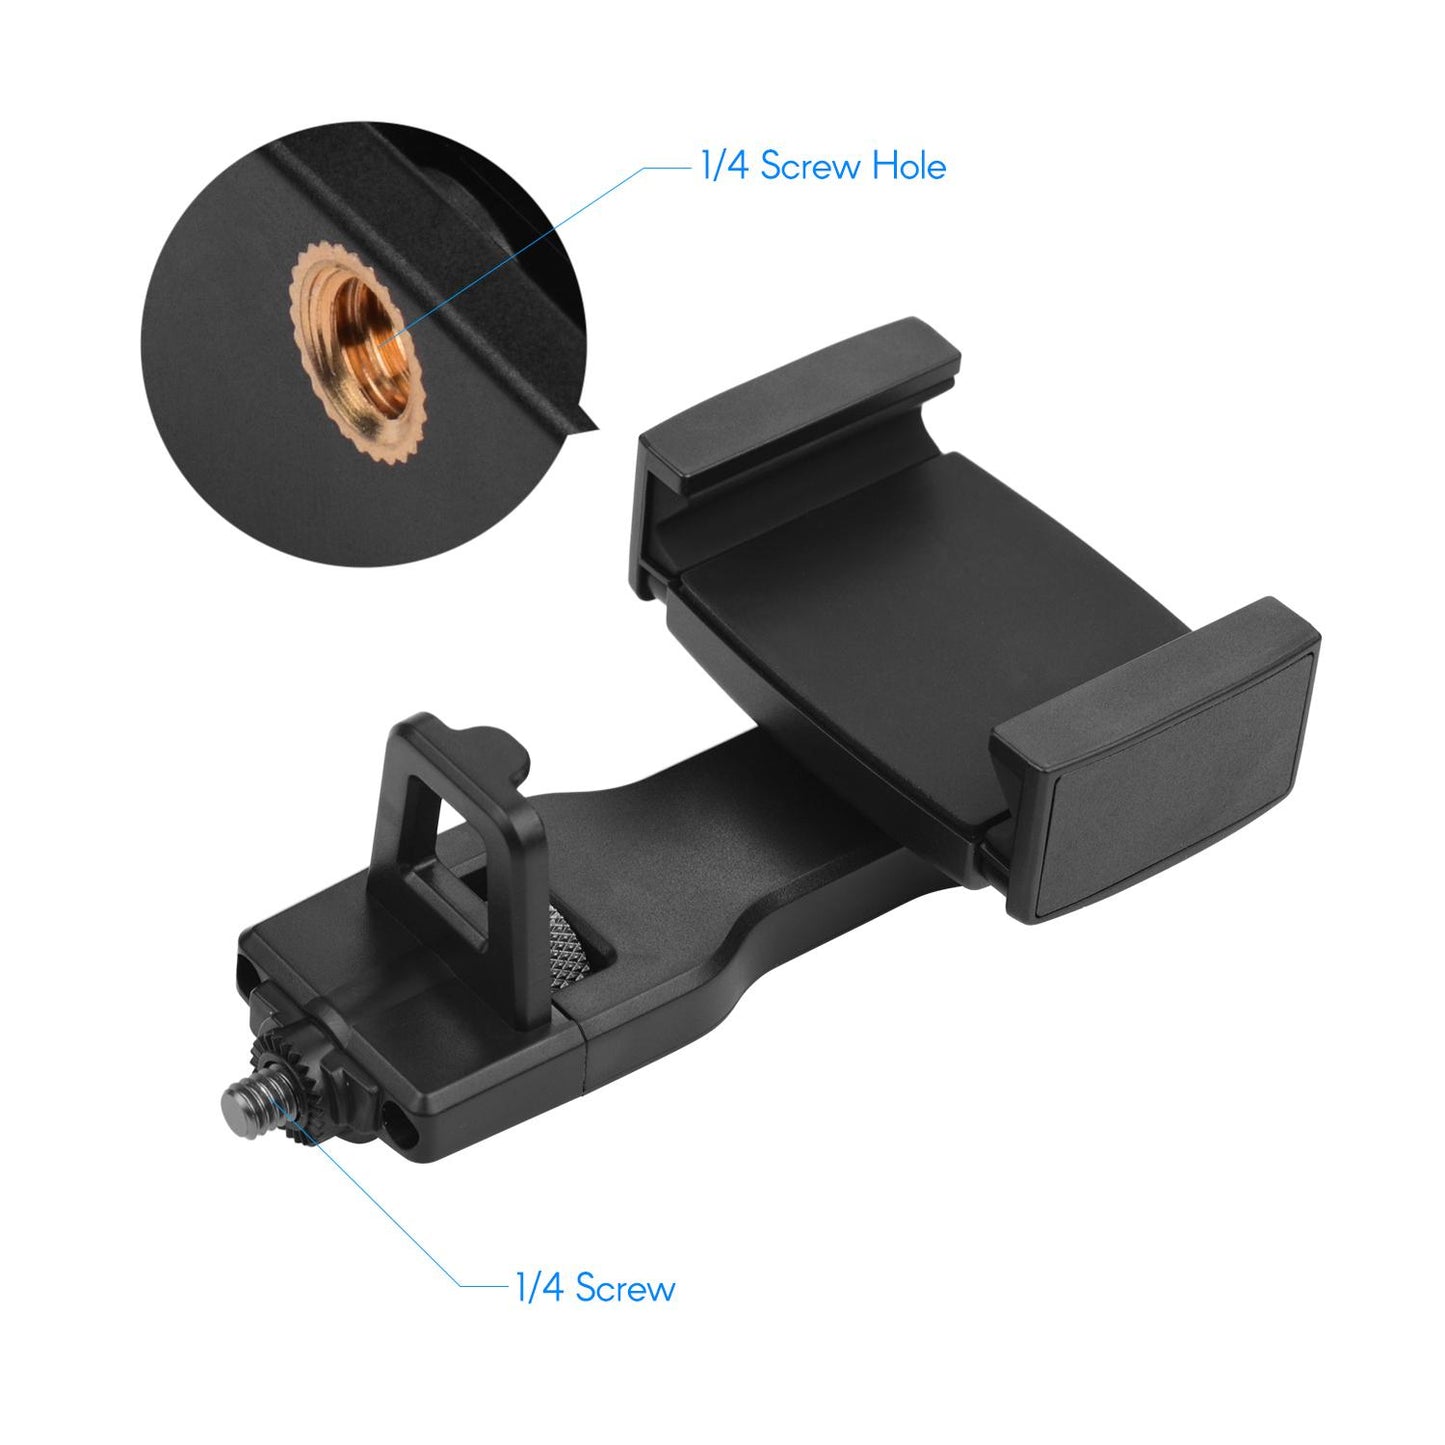 Hohem Phone Holder Universal Smartphone Clamp with 1/4" Screw Mount for iSteady Pro 2 / 3 / 4 Bracket 58mm to 89mm Devices